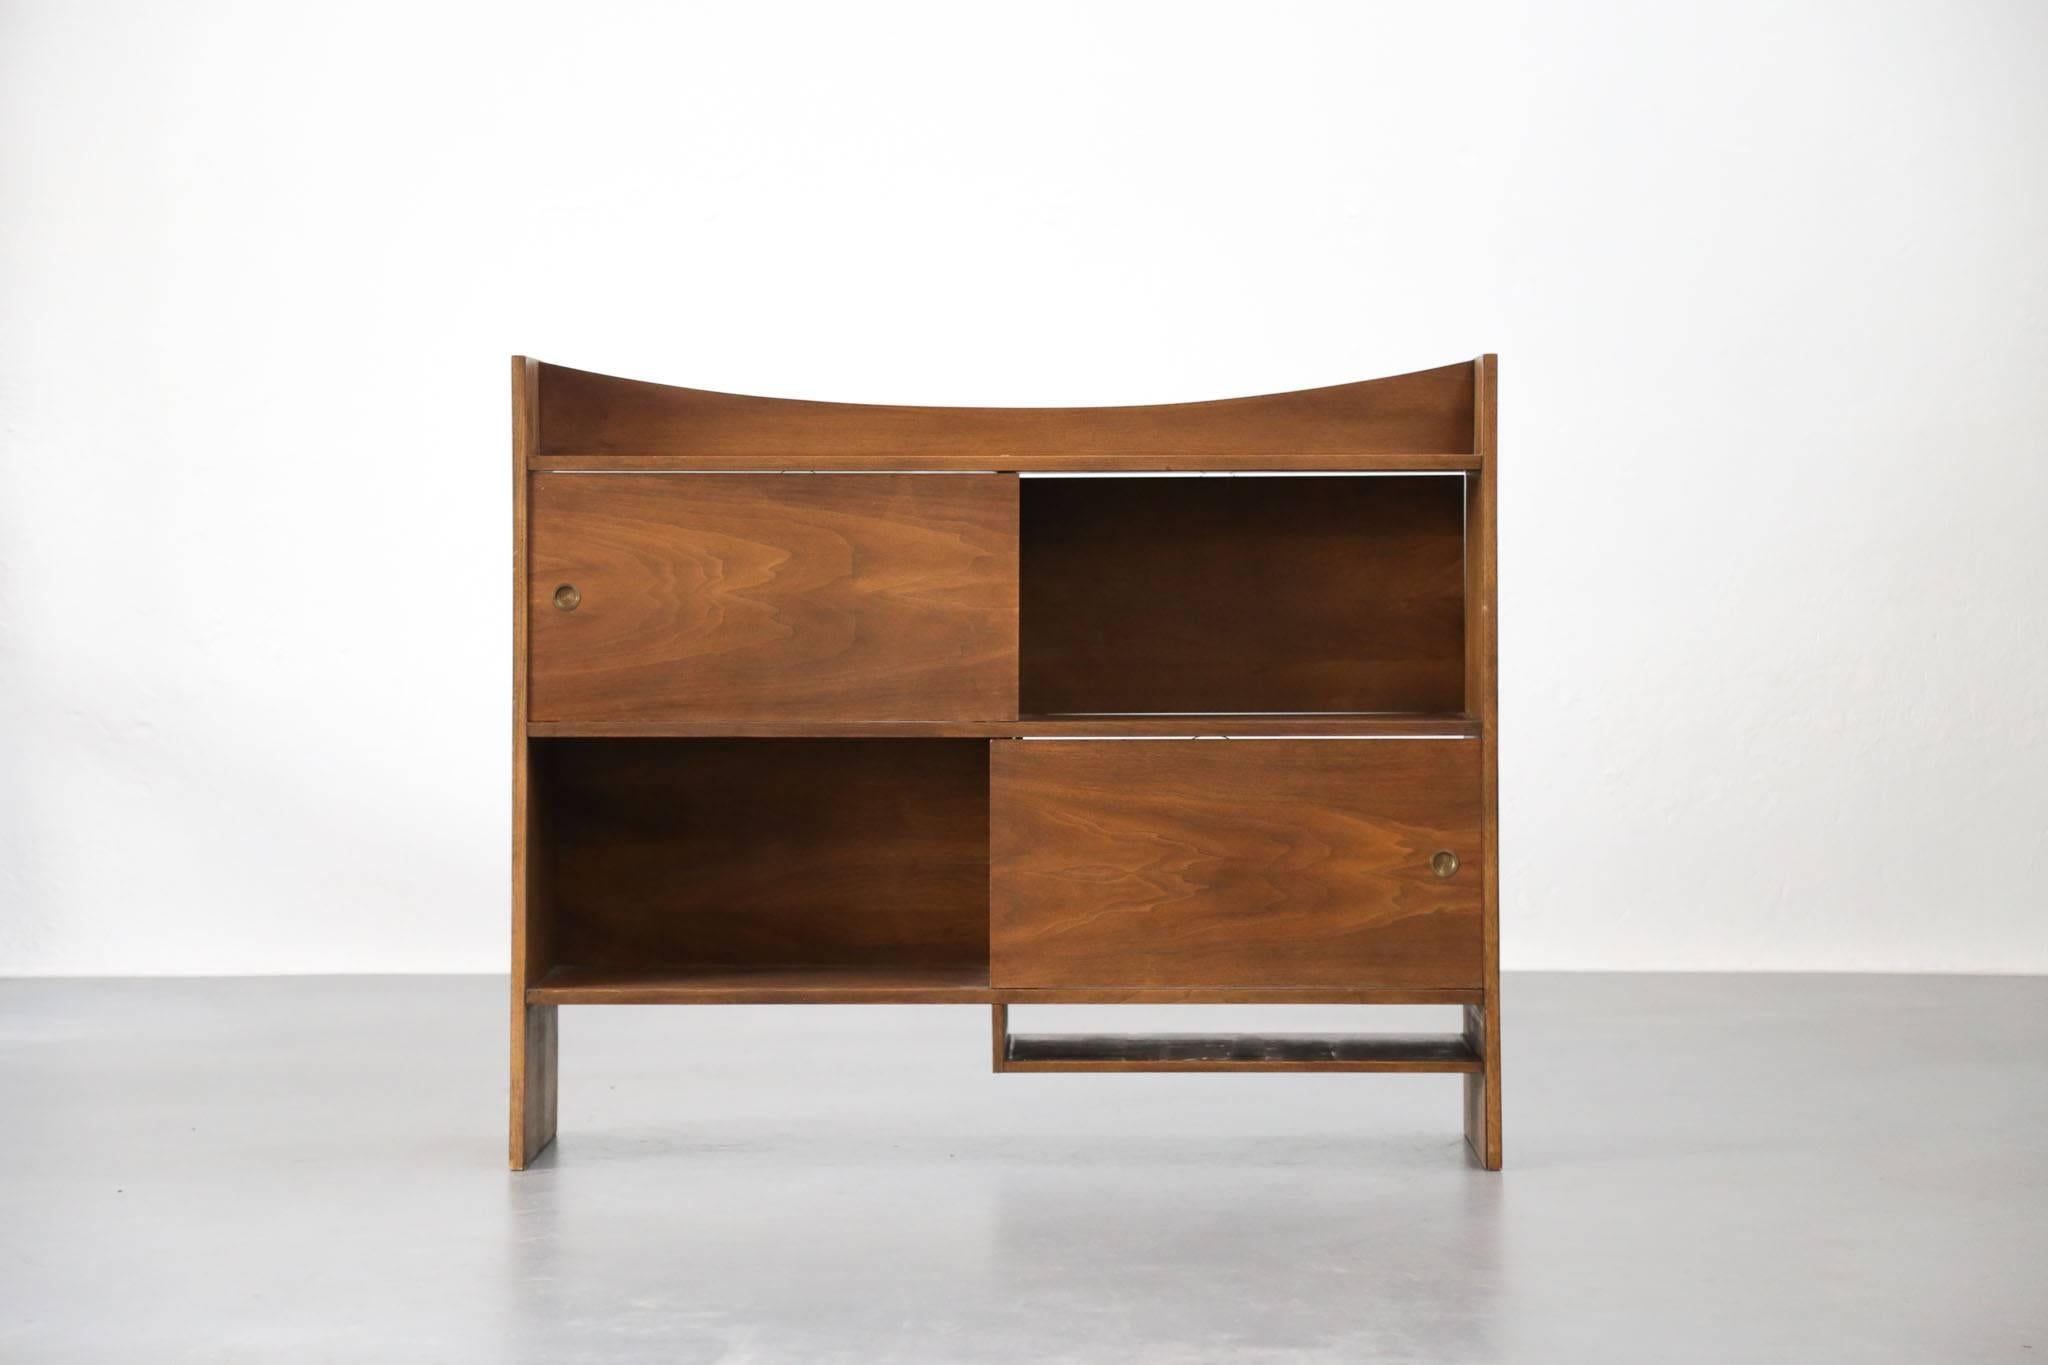 Cabinet, bookcases, commode in the style of Pierre Jeanneret
Two face with four sliding doors.
Room divided.